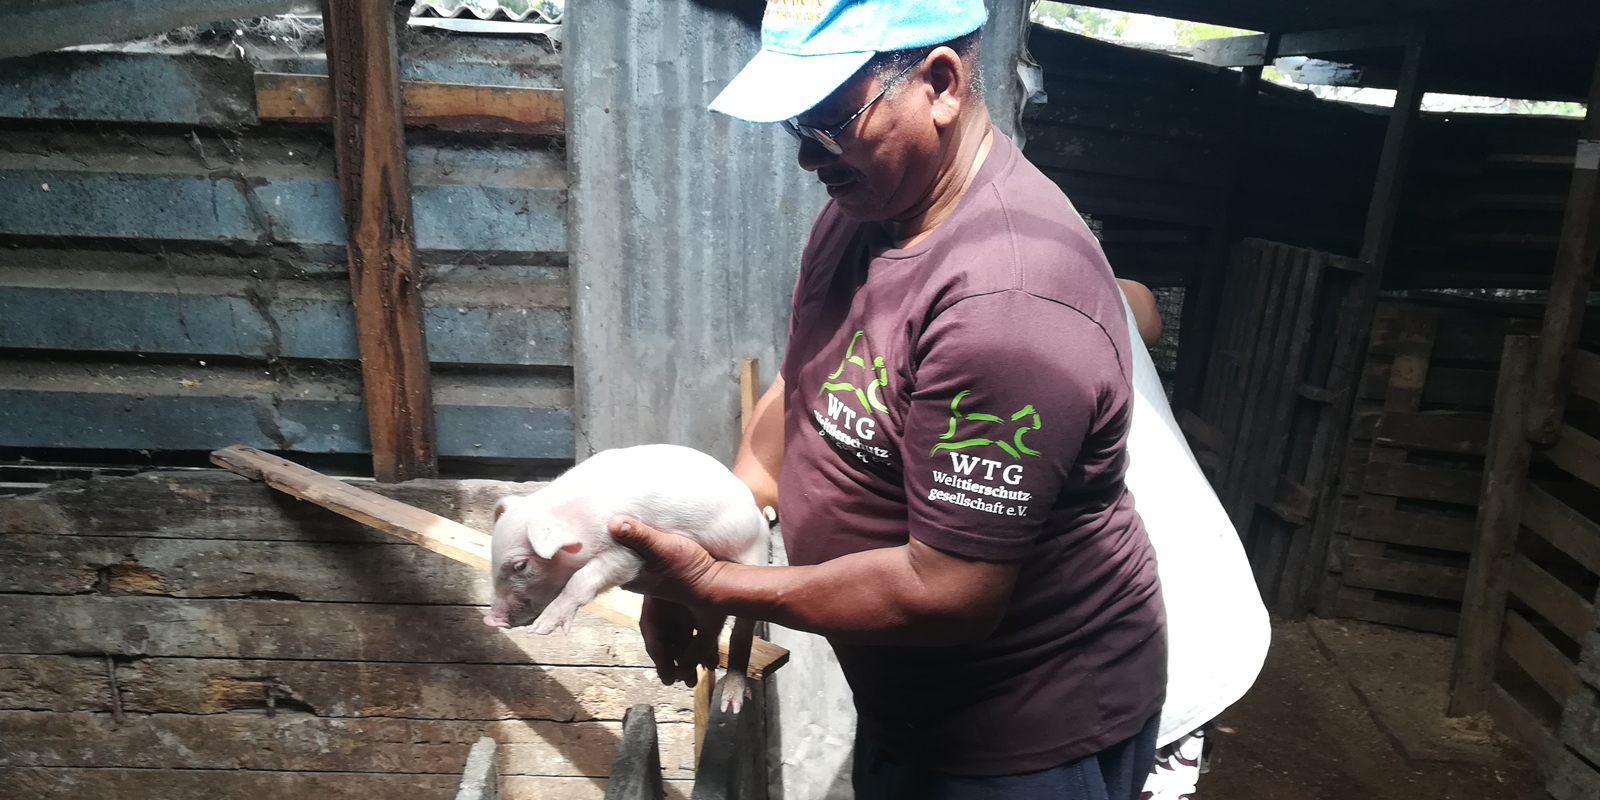 We teach farmers in order to improve husbandry conditions of their animals